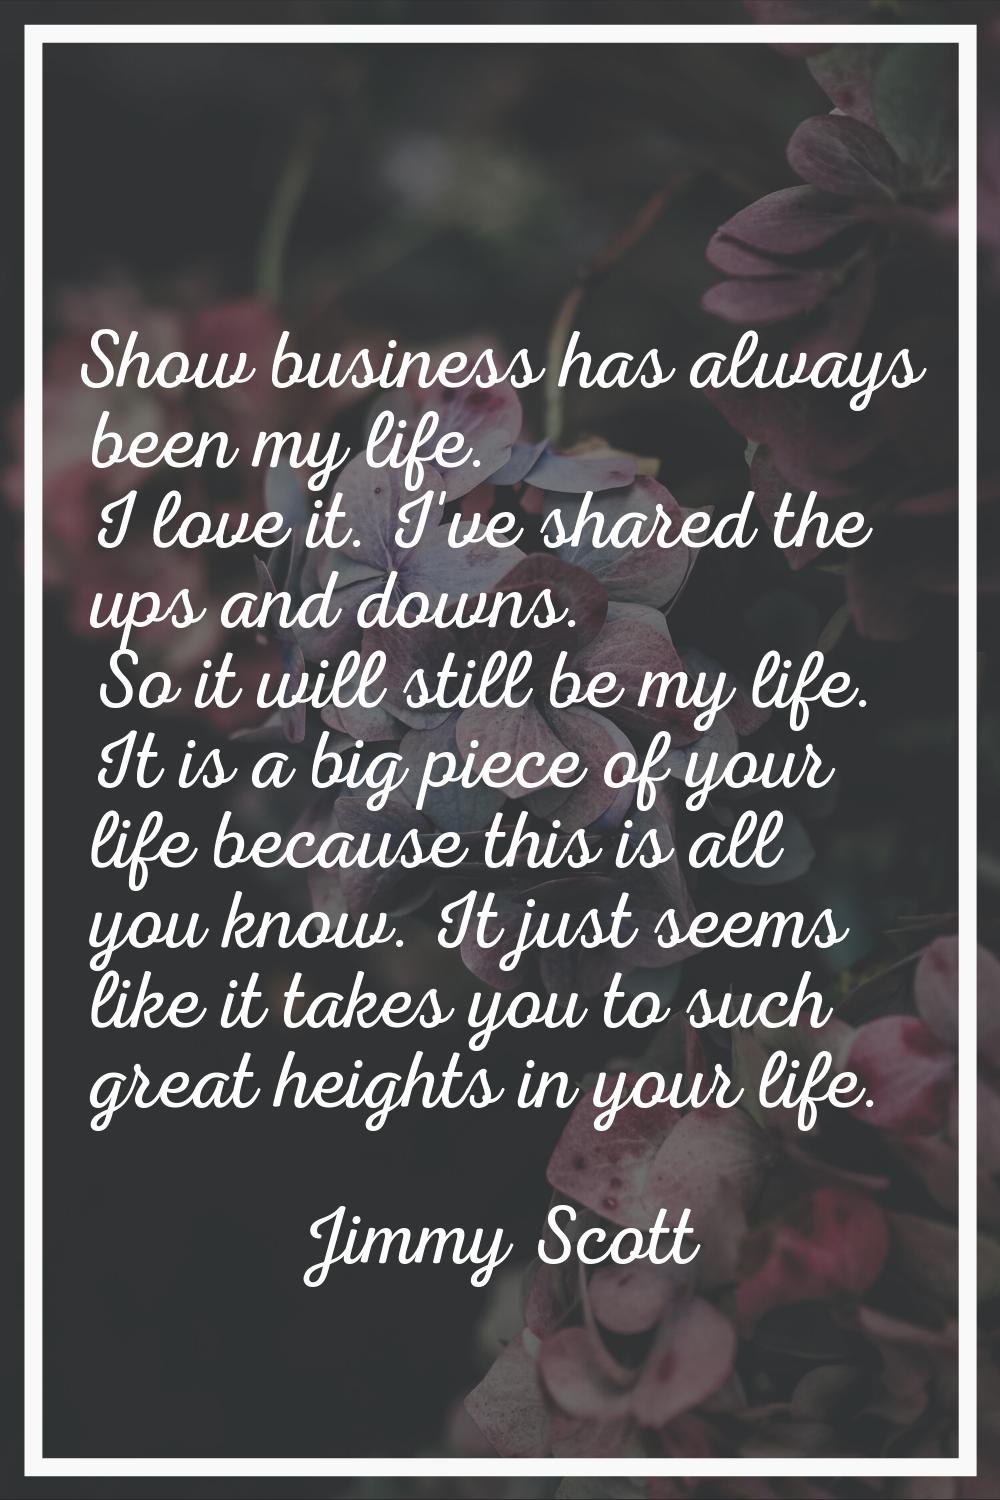 Show business has always been my life. I love it. I've shared the ups and downs. So it will still b